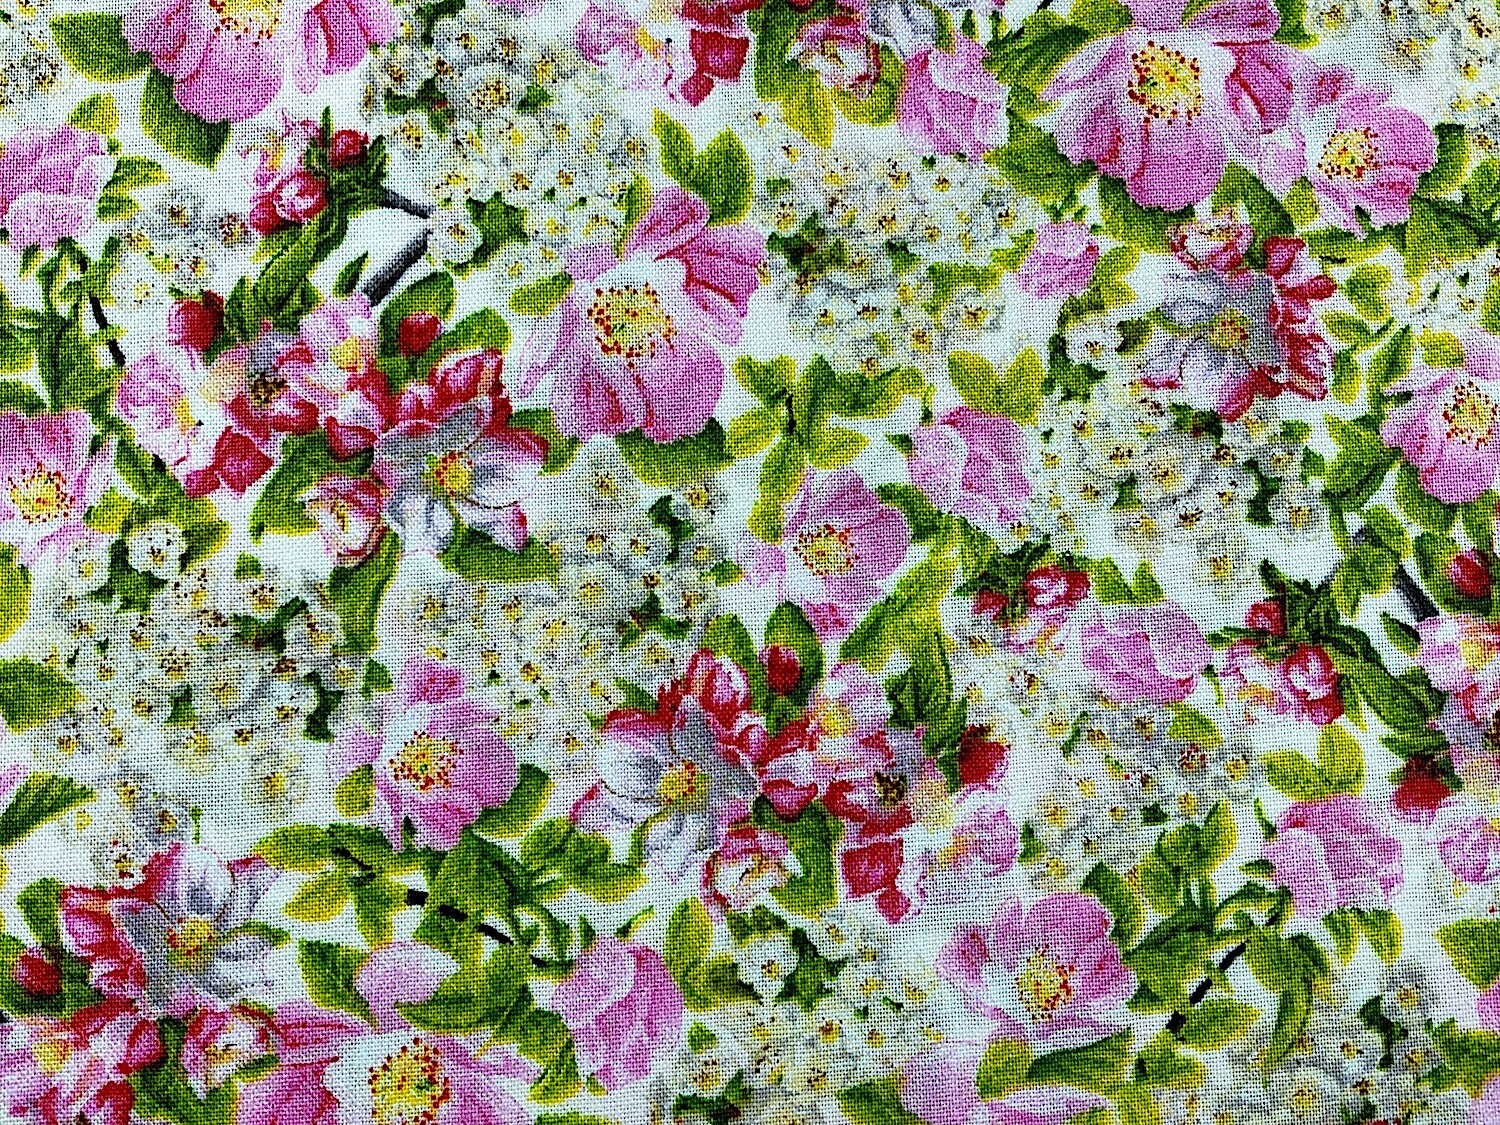 This fabric is called songs of nature and is covered with dogwood flowers.